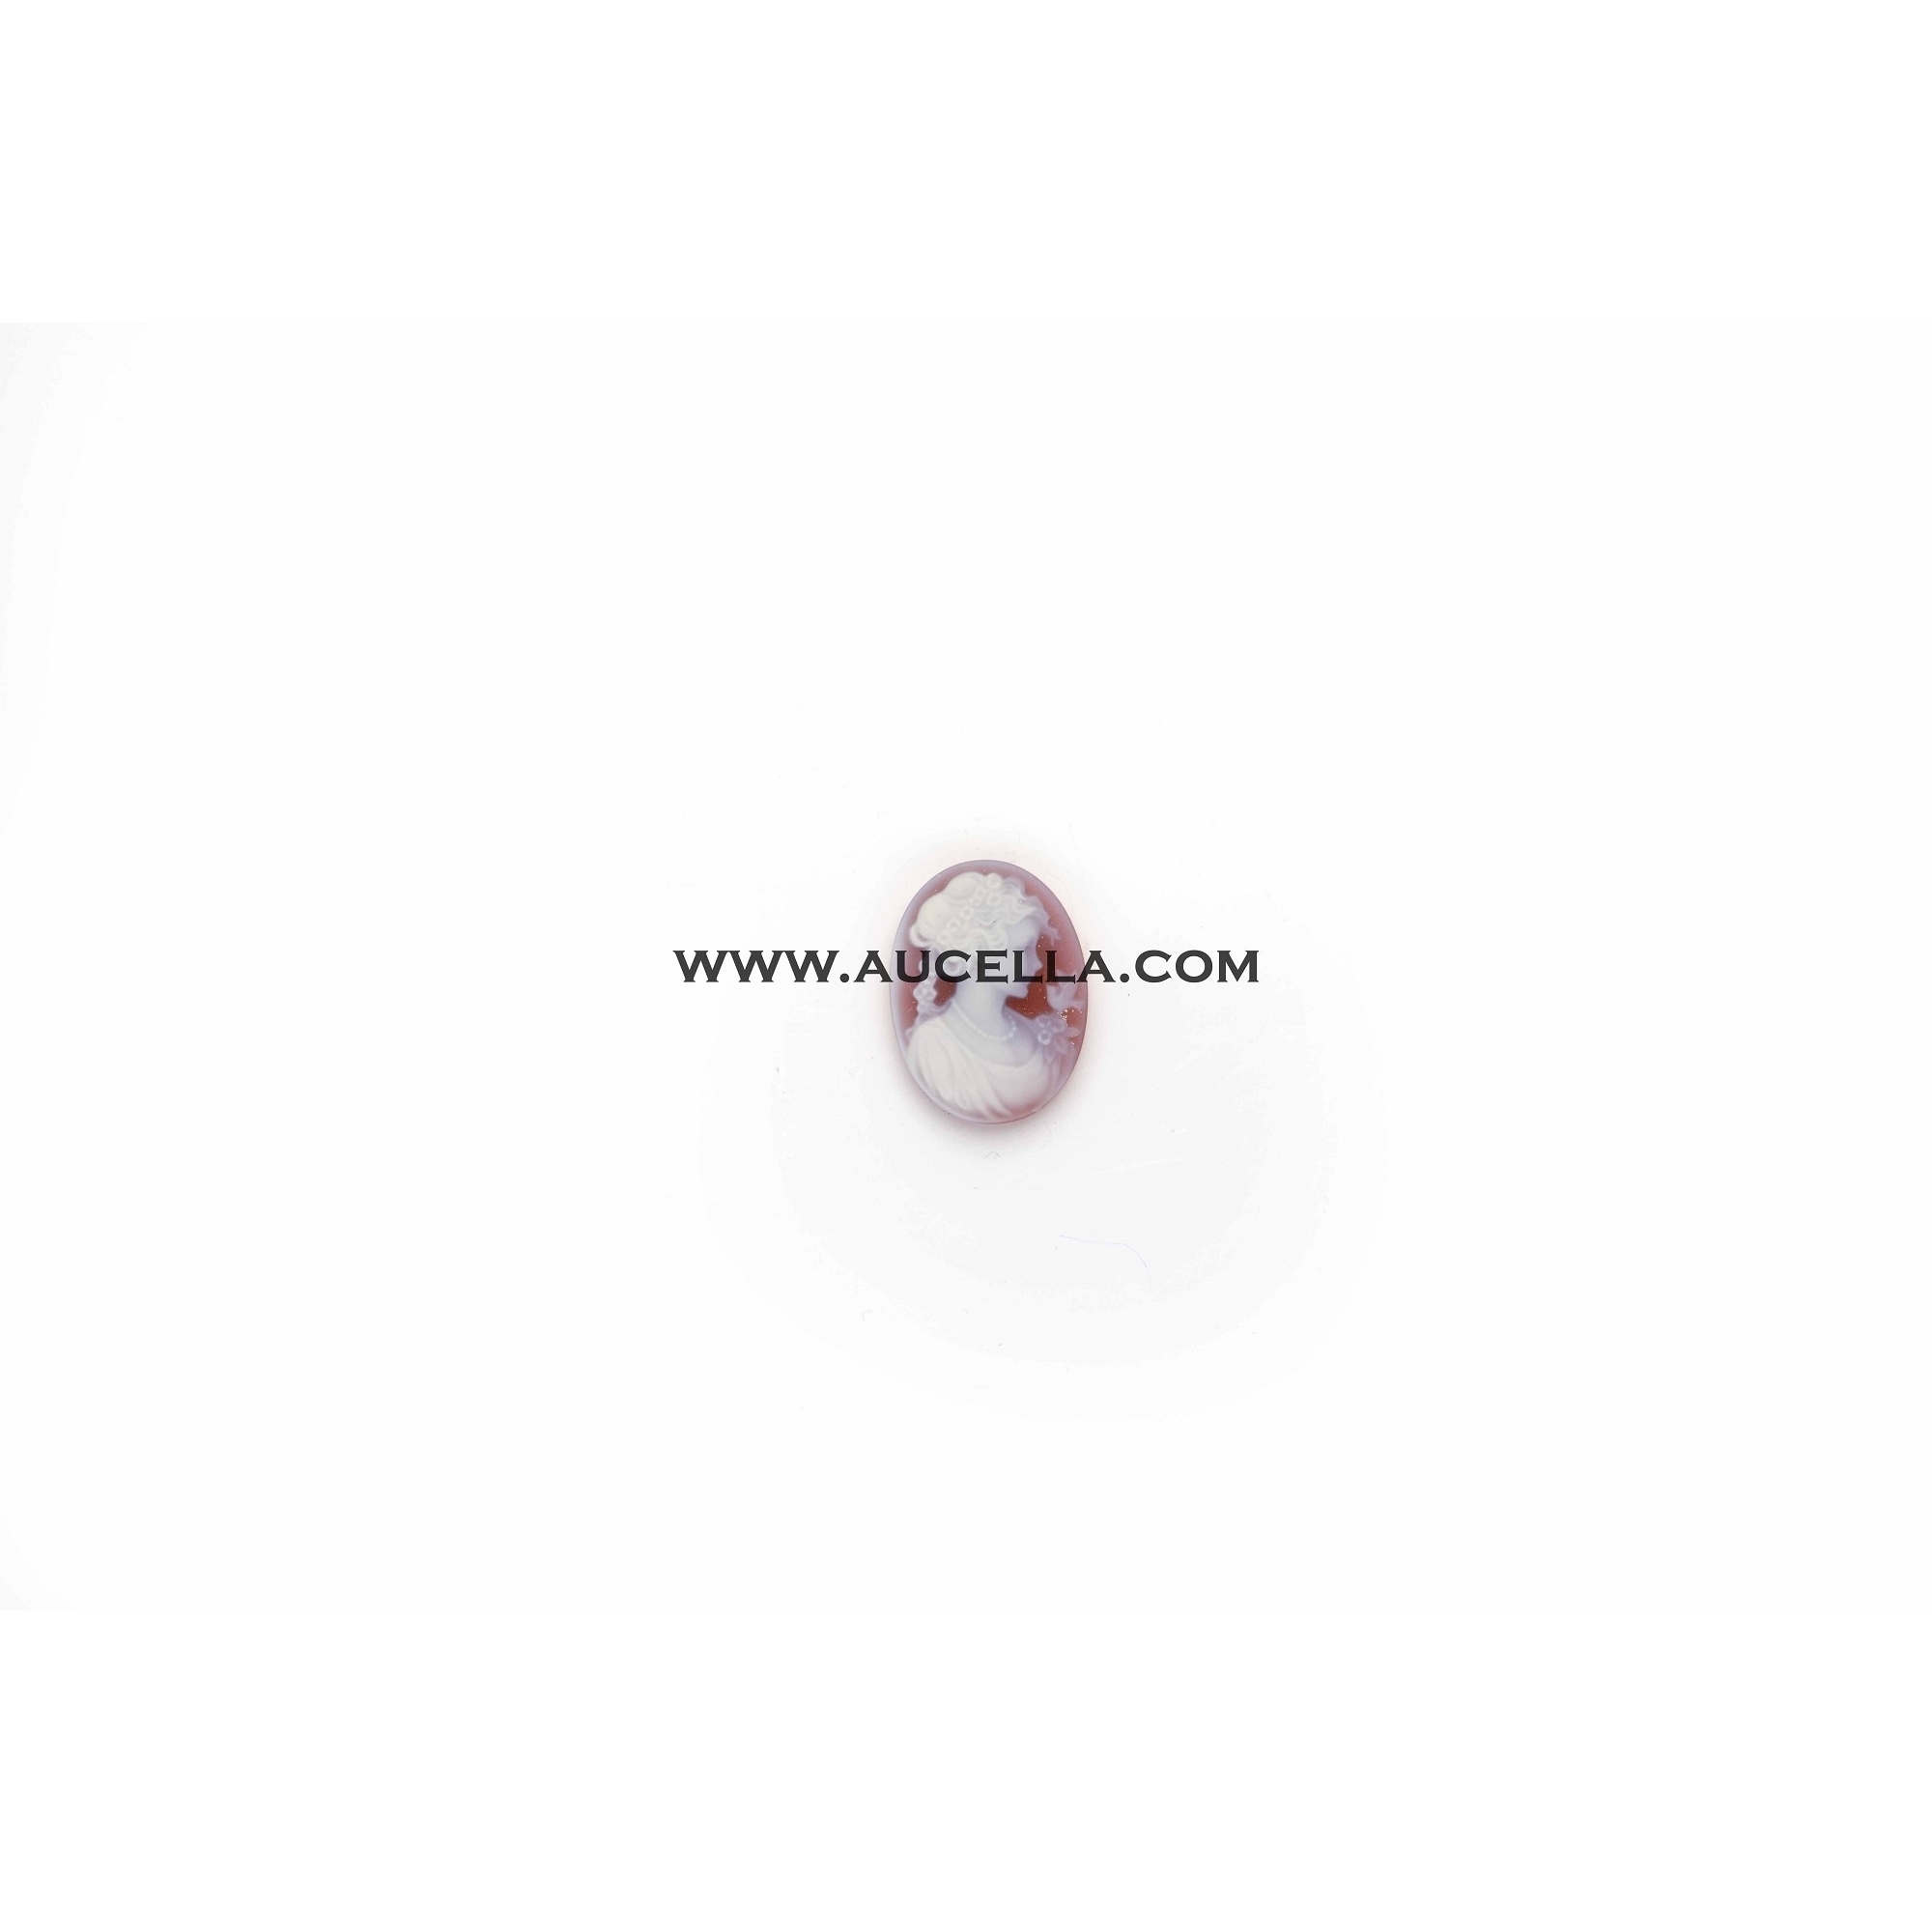 Agate cameo 14 mm